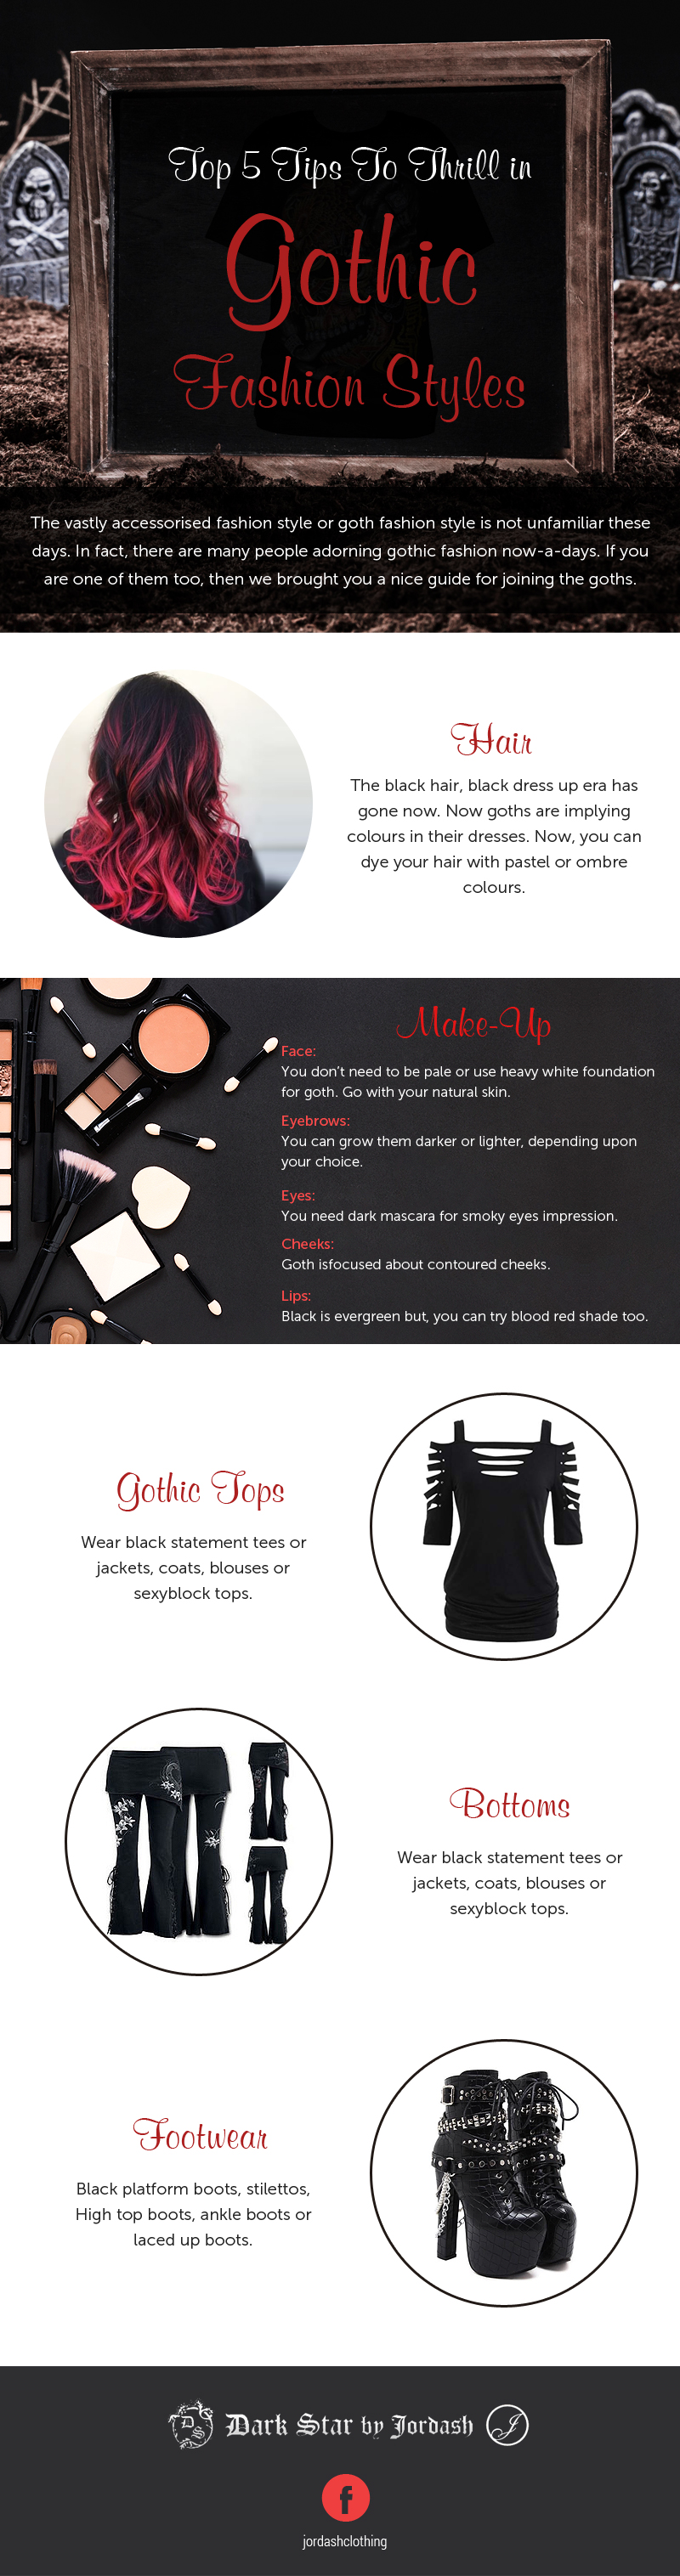 Top 5 Ways To Thrill In Gothic Fashion Styles